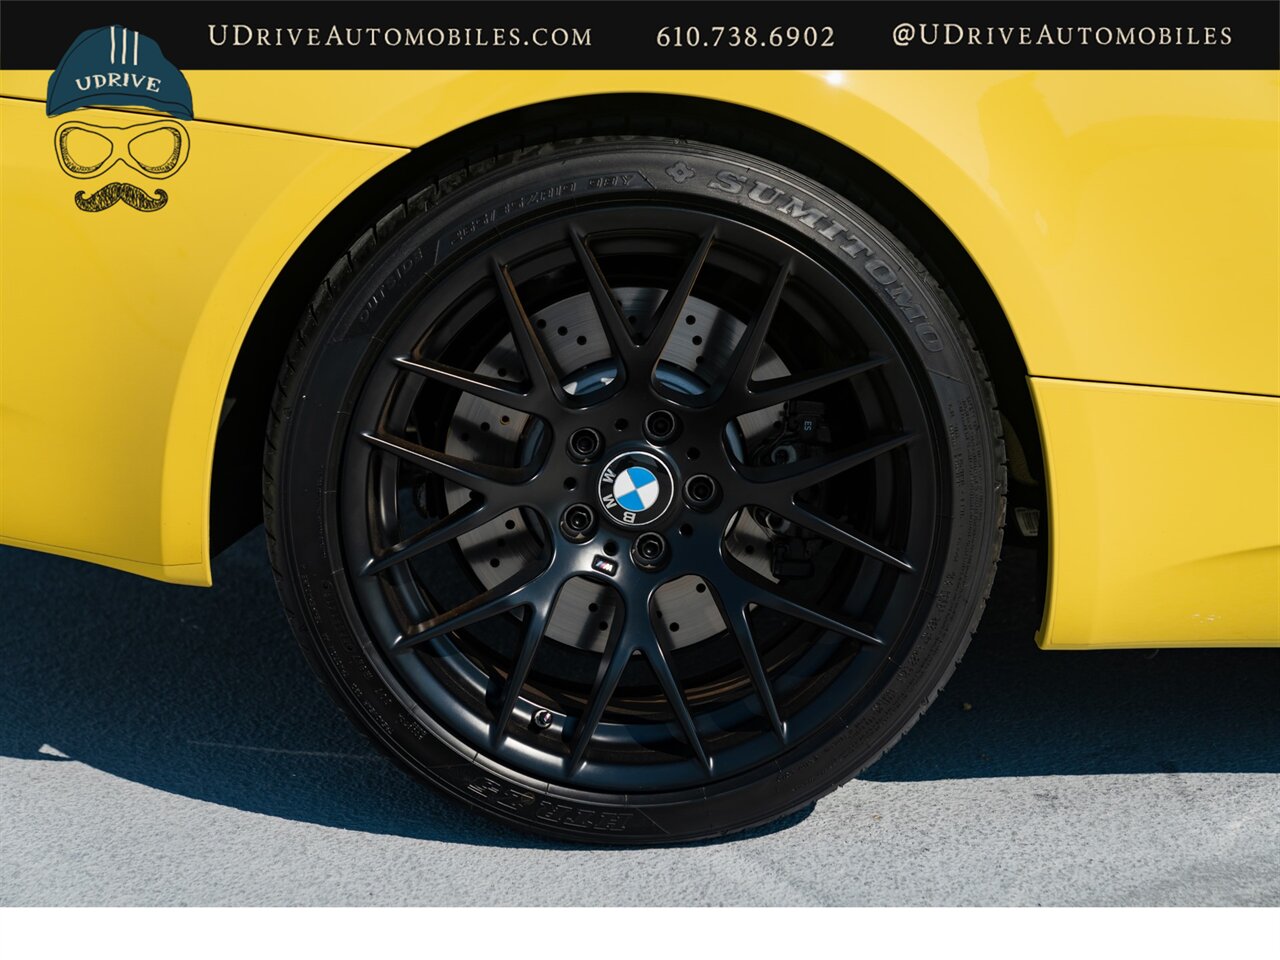 2010 BMW M3  E92 6 Sp Individual Dakar Cloth Seats Carbon Roof No NAV Rod Bearings Replaced - Photo 55 - West Chester, PA 19382